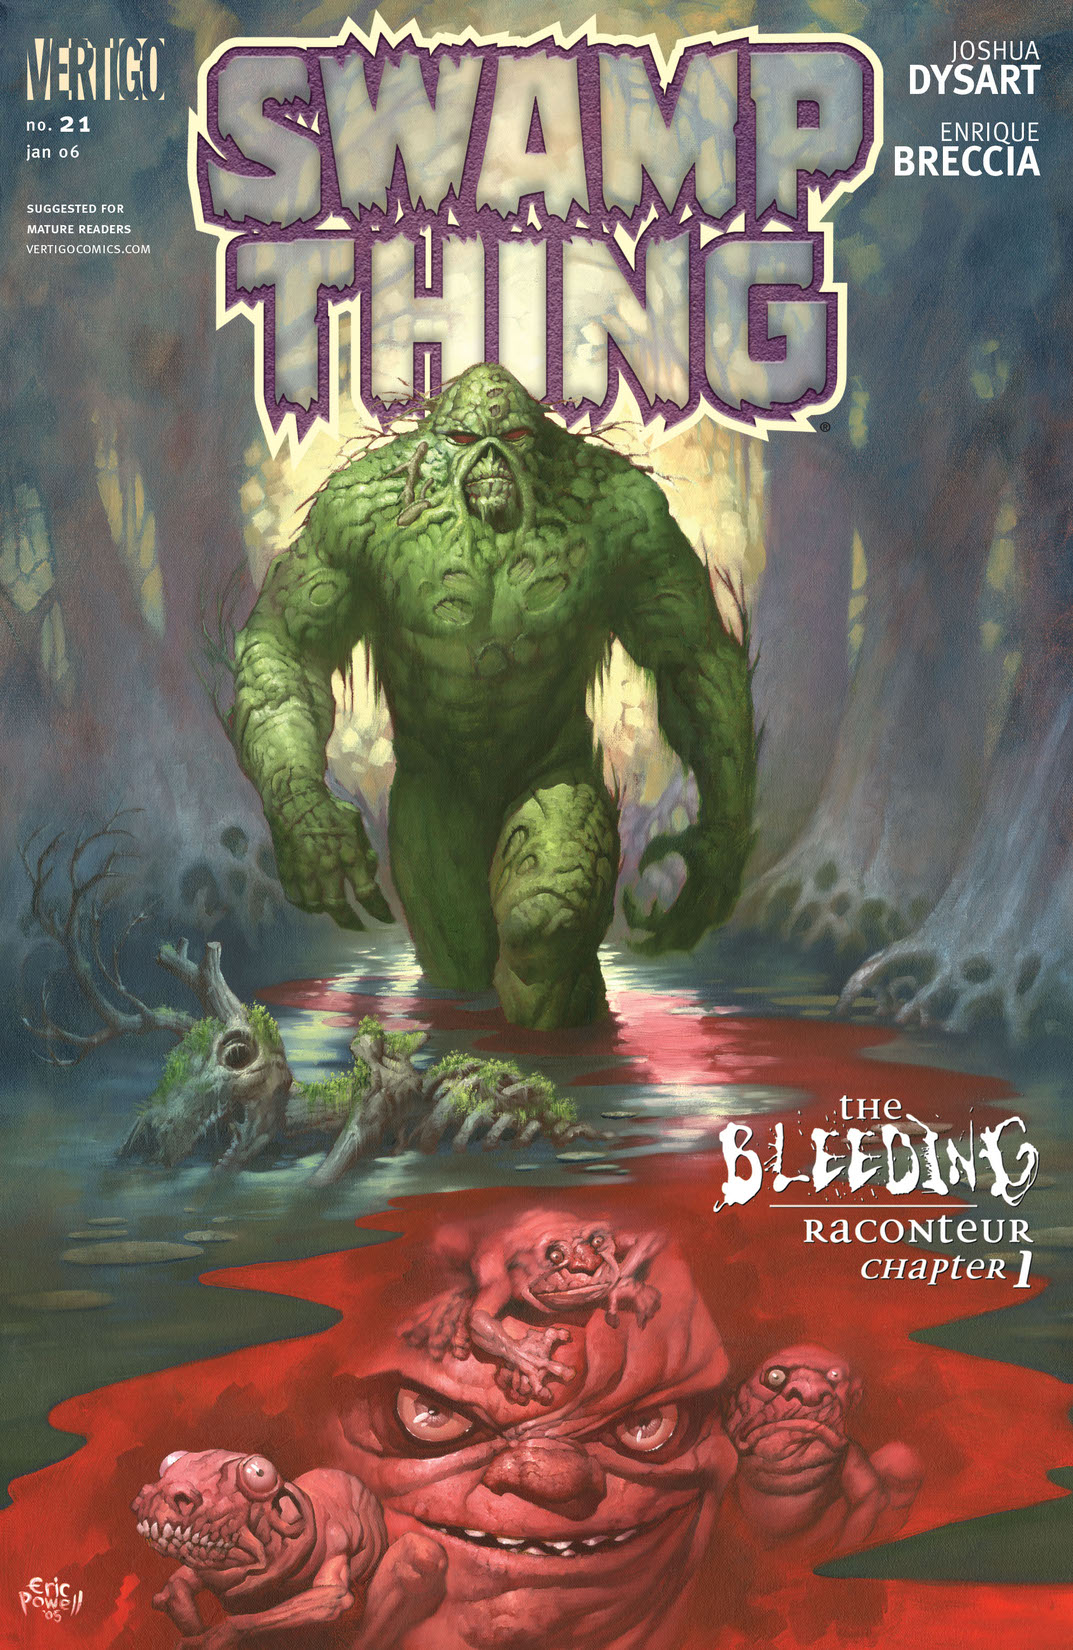 Swamp Thing (2004-) #21 preview images